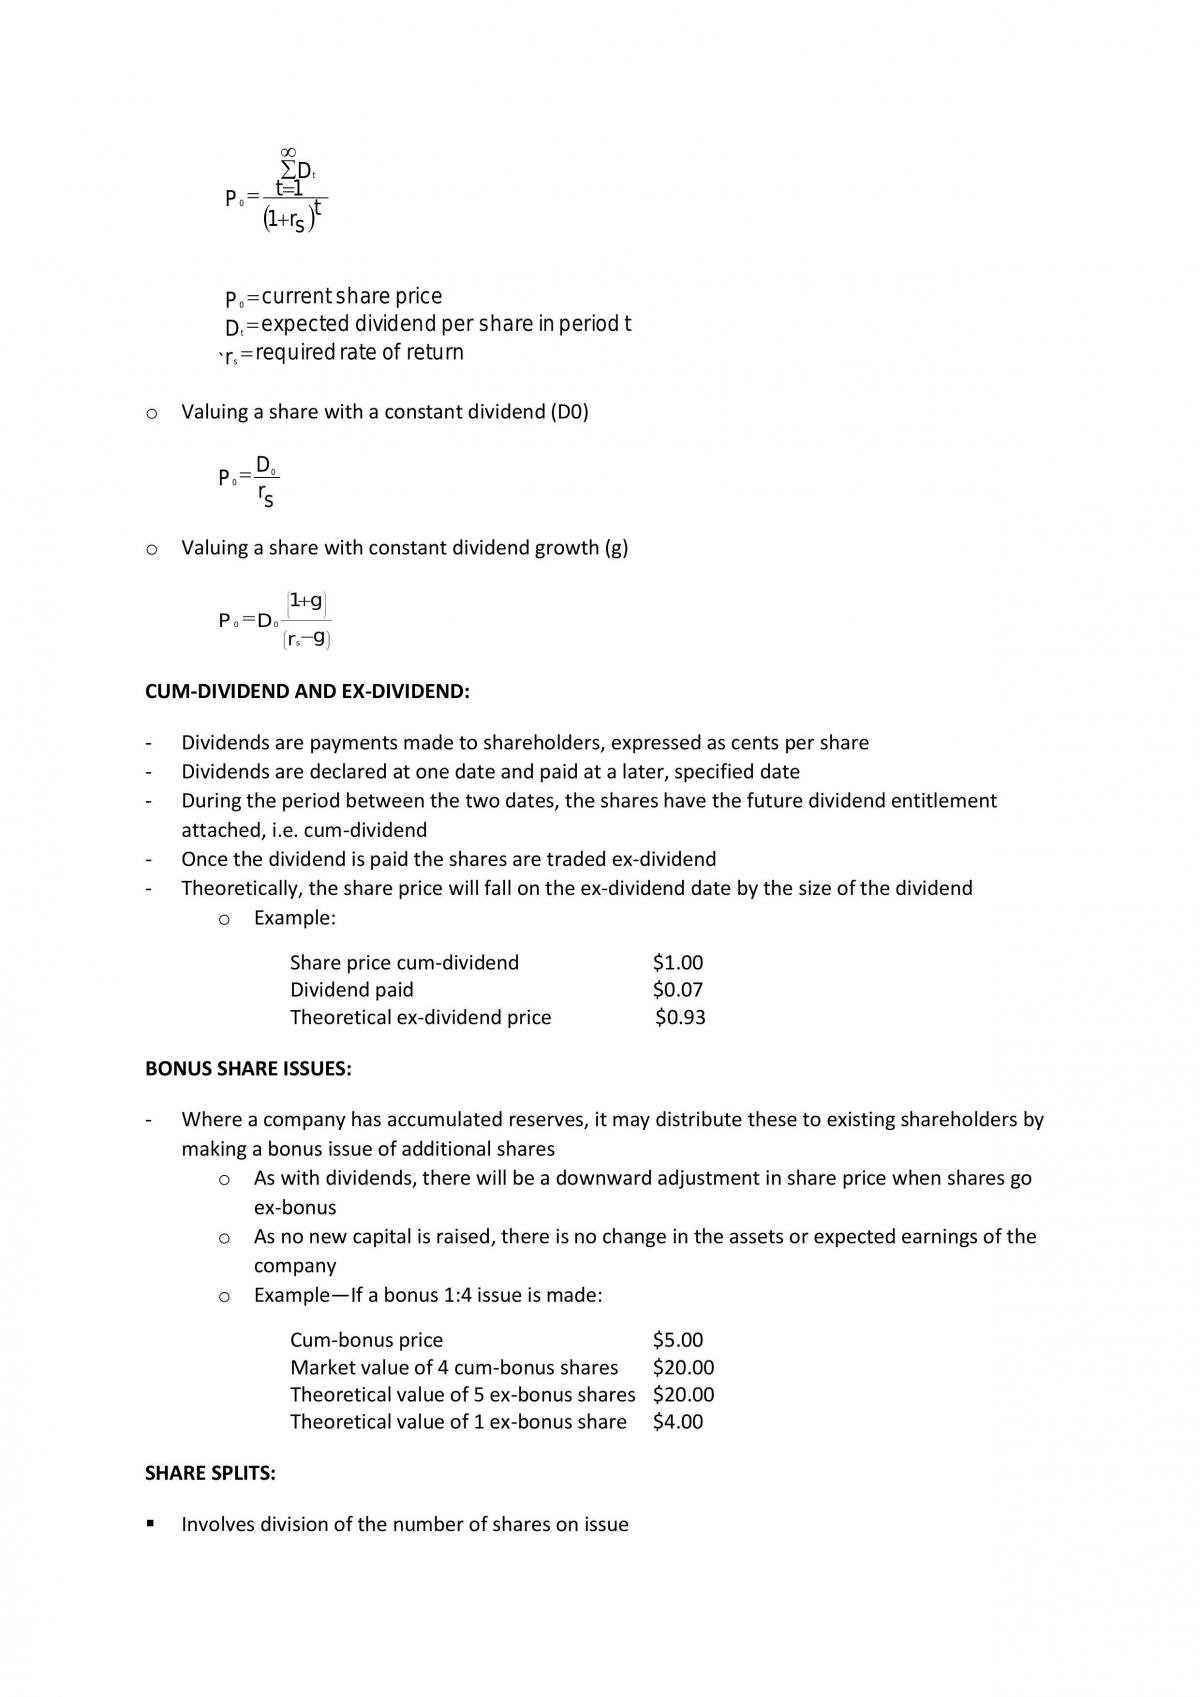 FINS1612 Complete Semester Summarised Notes - Page 40